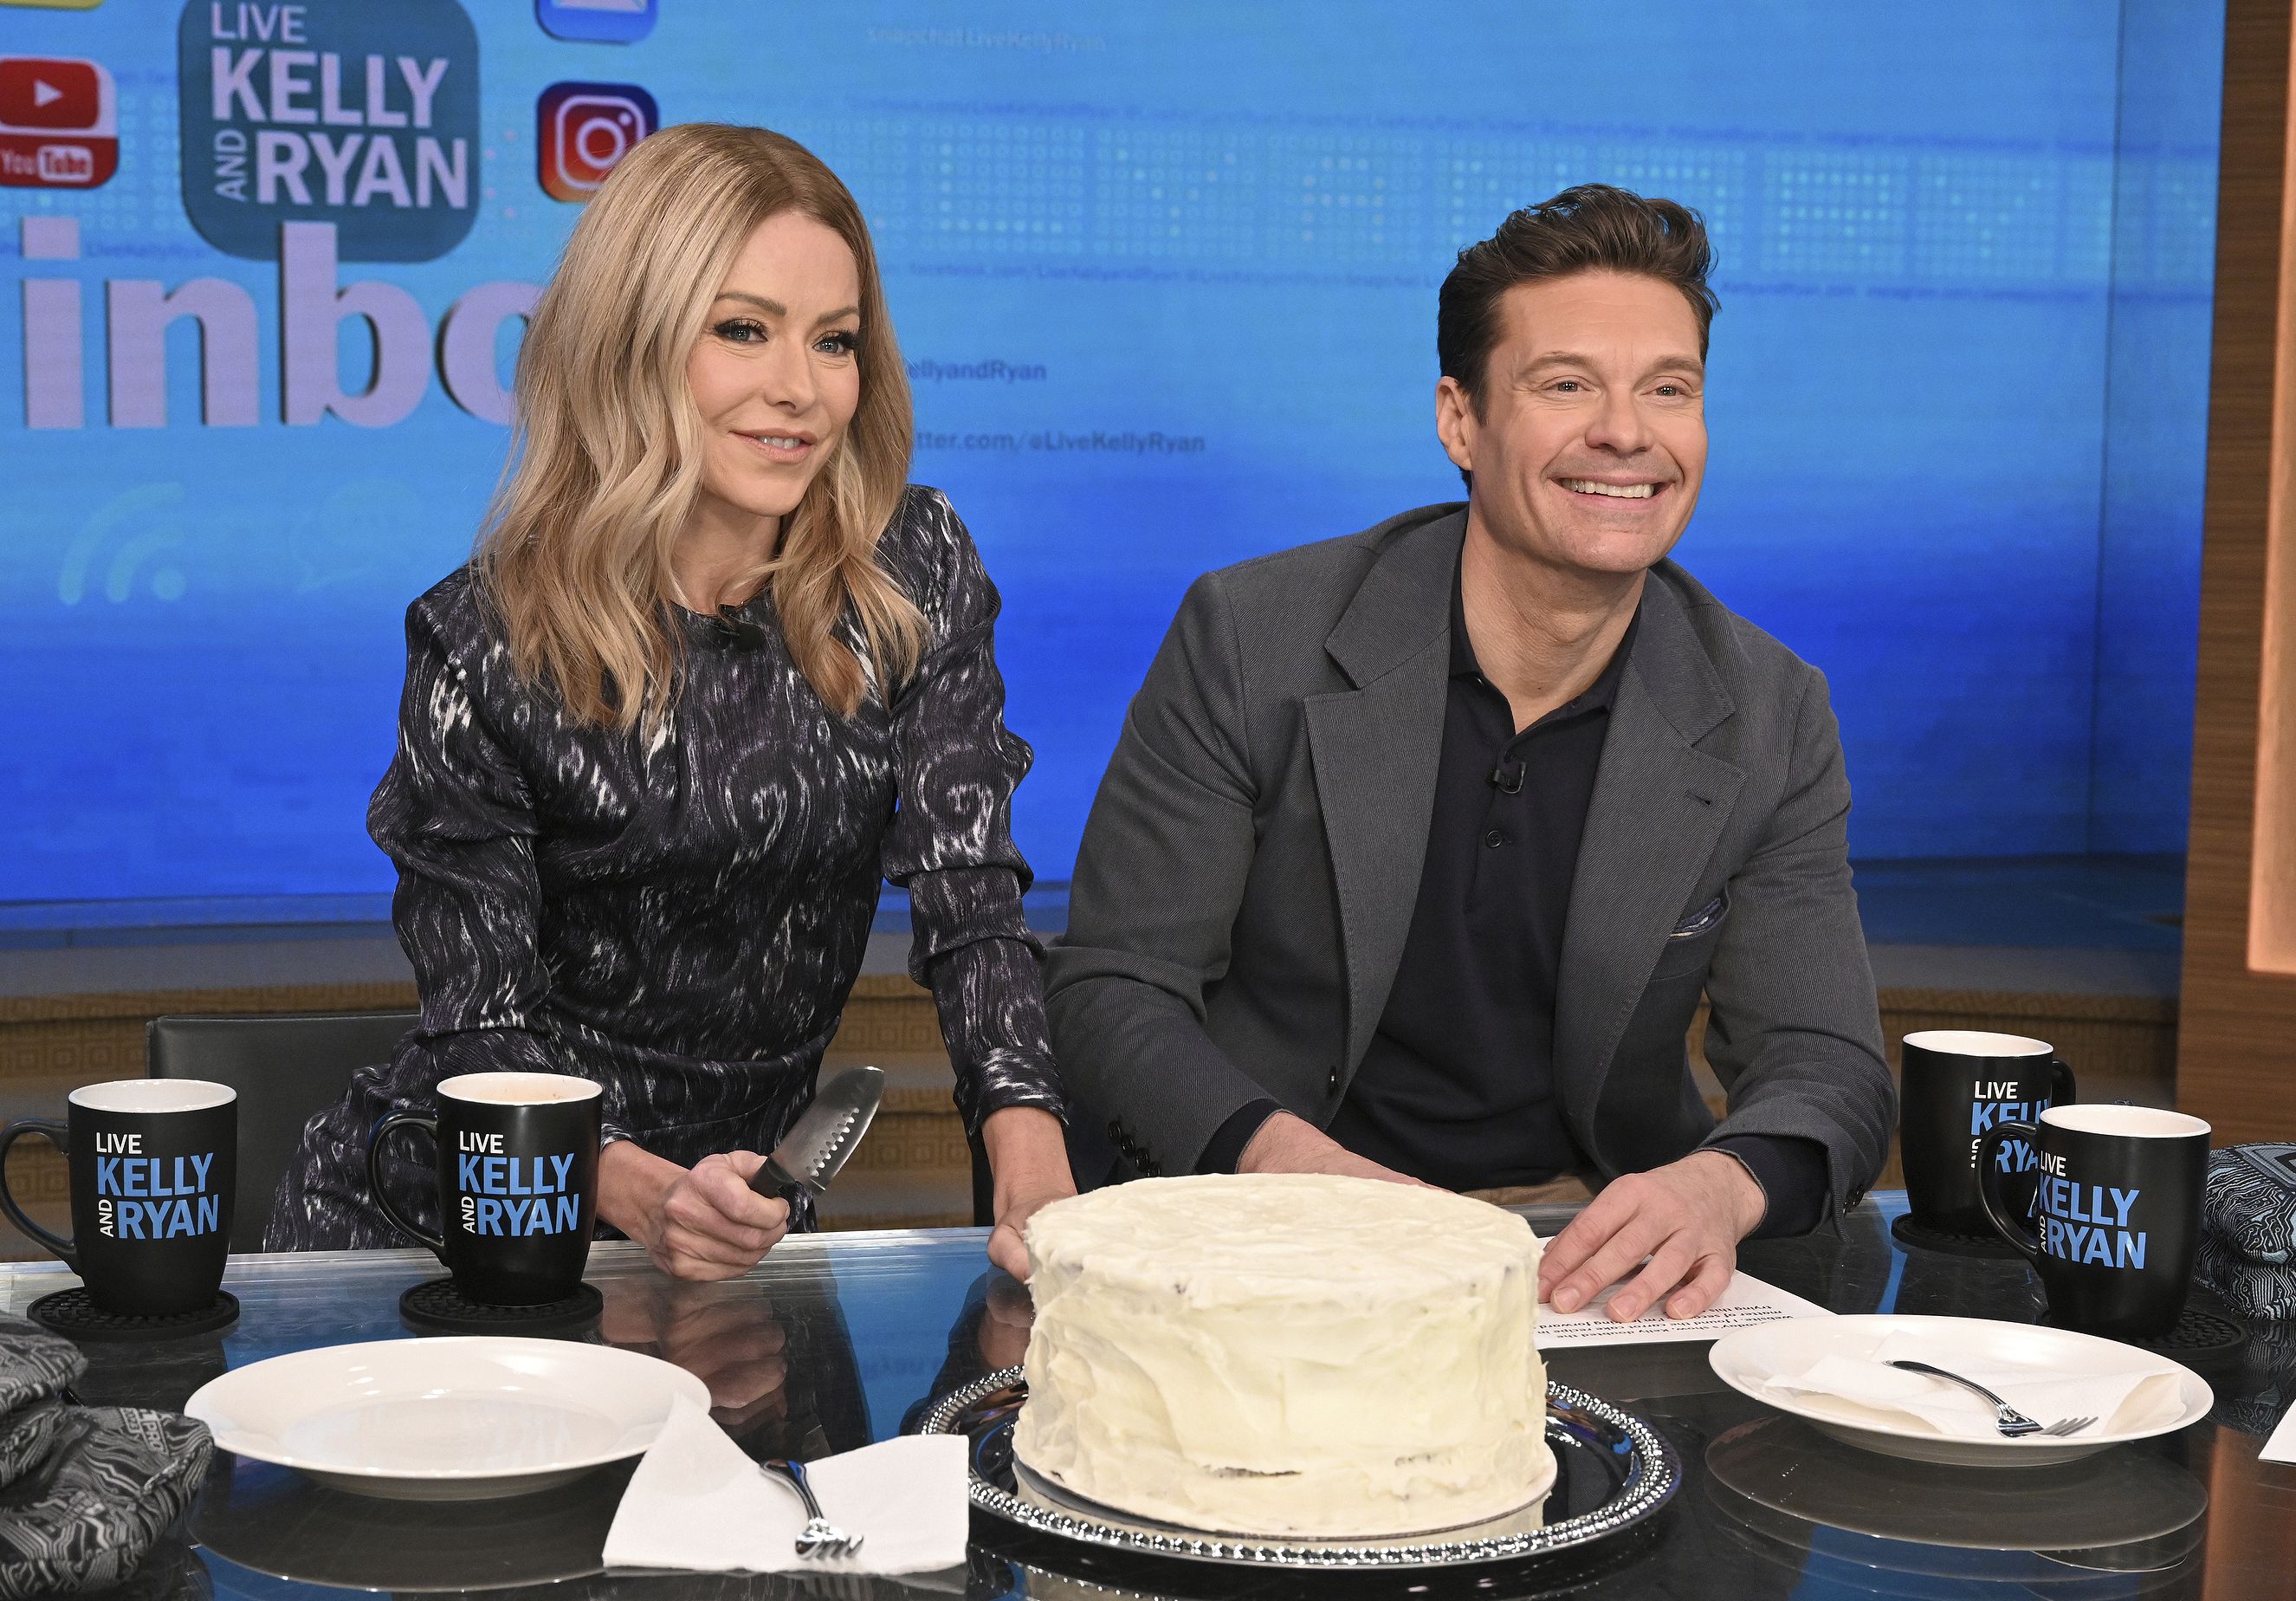 Ryan Seacrest to leave ‘Live with Kelly and Ryan’ in spring